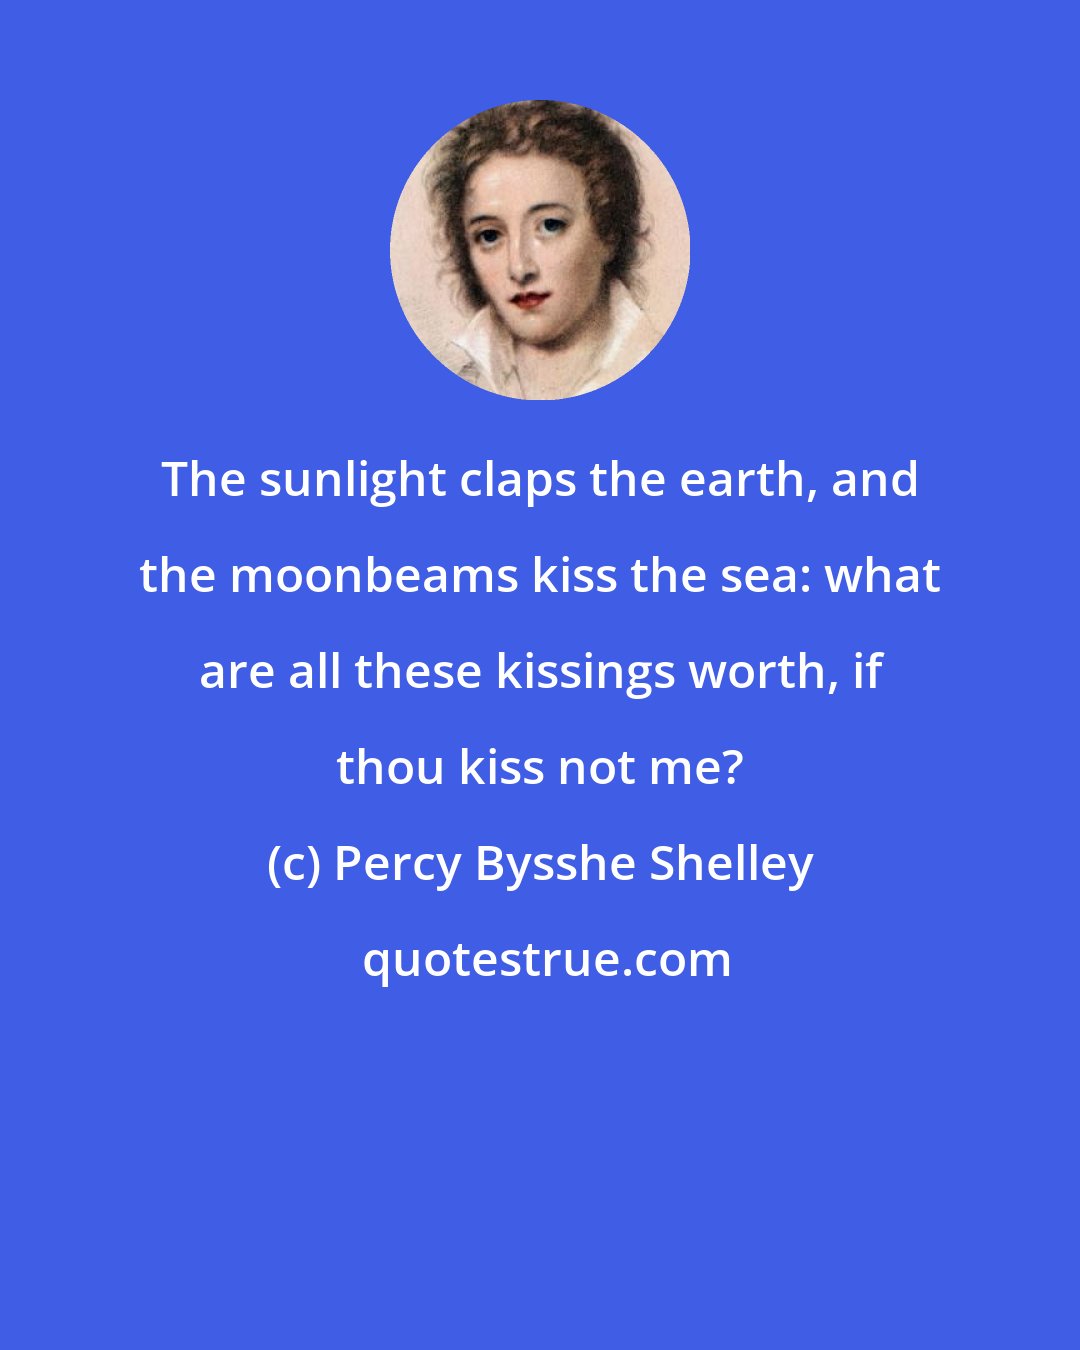 Percy Bysshe Shelley: The sunlight claps the earth, and the moonbeams kiss the sea: what are all these kissings worth, if thou kiss not me?